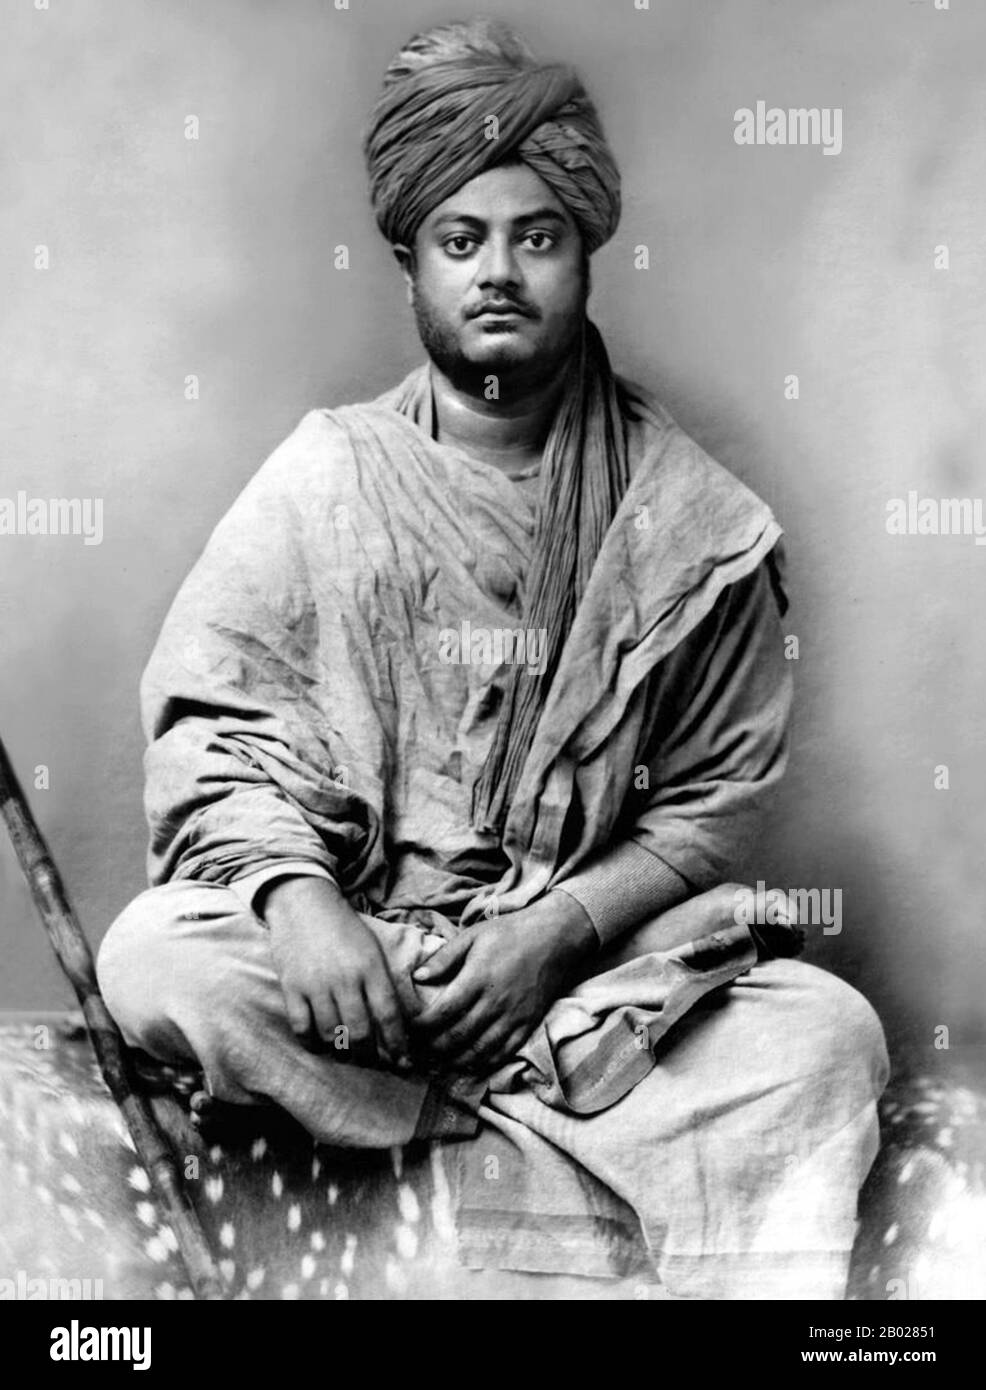 Swami Vivekananda (12 January 1863 – 4 July 1902), born Narendra Nath Datta, was an Indian Hindu monk and chief disciple of the 19th-century saint Ramakrishna. He was a key figure in the introduction of the Indian philosophies of Vedanta and Yoga to the western world and was credited with raising interfaith awareness, bringing Hinduism to the status of a major world religion in the late 19th century.  He was a major force in the revival of Hinduism in India and contributed to the notion of nationalism in colonial India. Vivekananda founded the Ramakrishna Math and the Ramakrishna Mission. He i Stock Photo